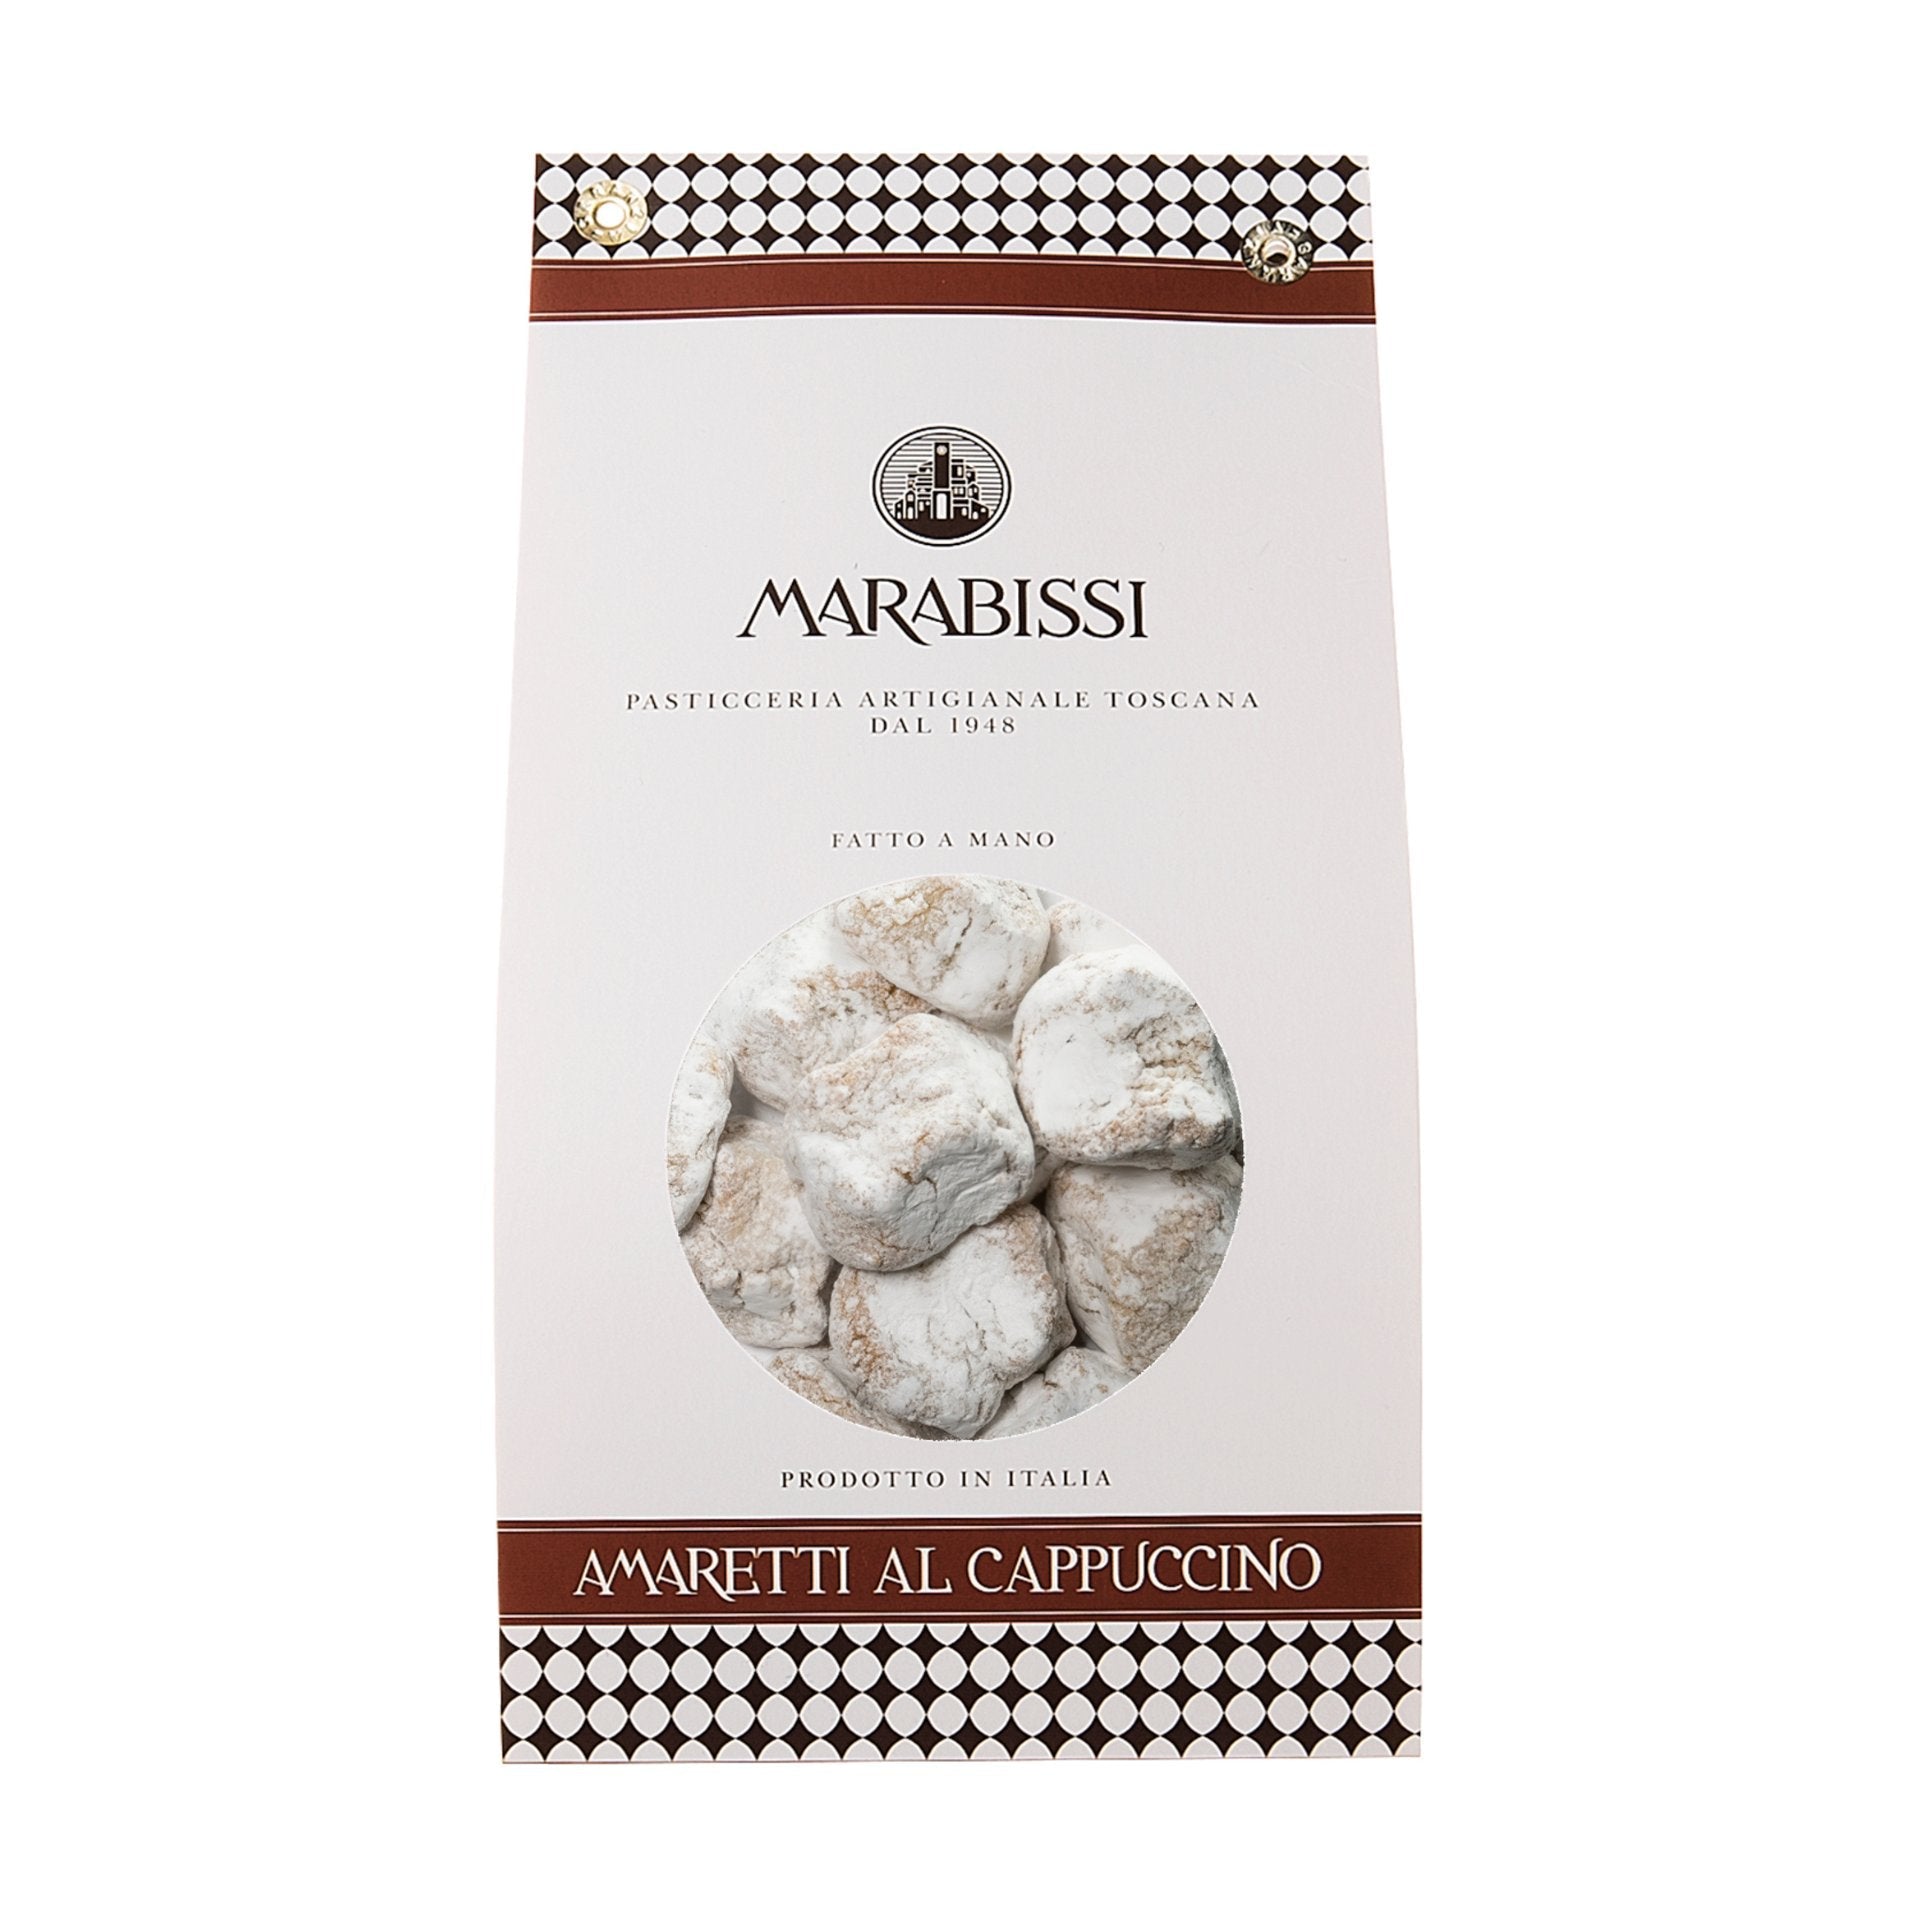 Marabissi Soft Cappuccino Amaretti (White Bag) 180g  | Imported and distributed in the UK by Just Gourmet Foods